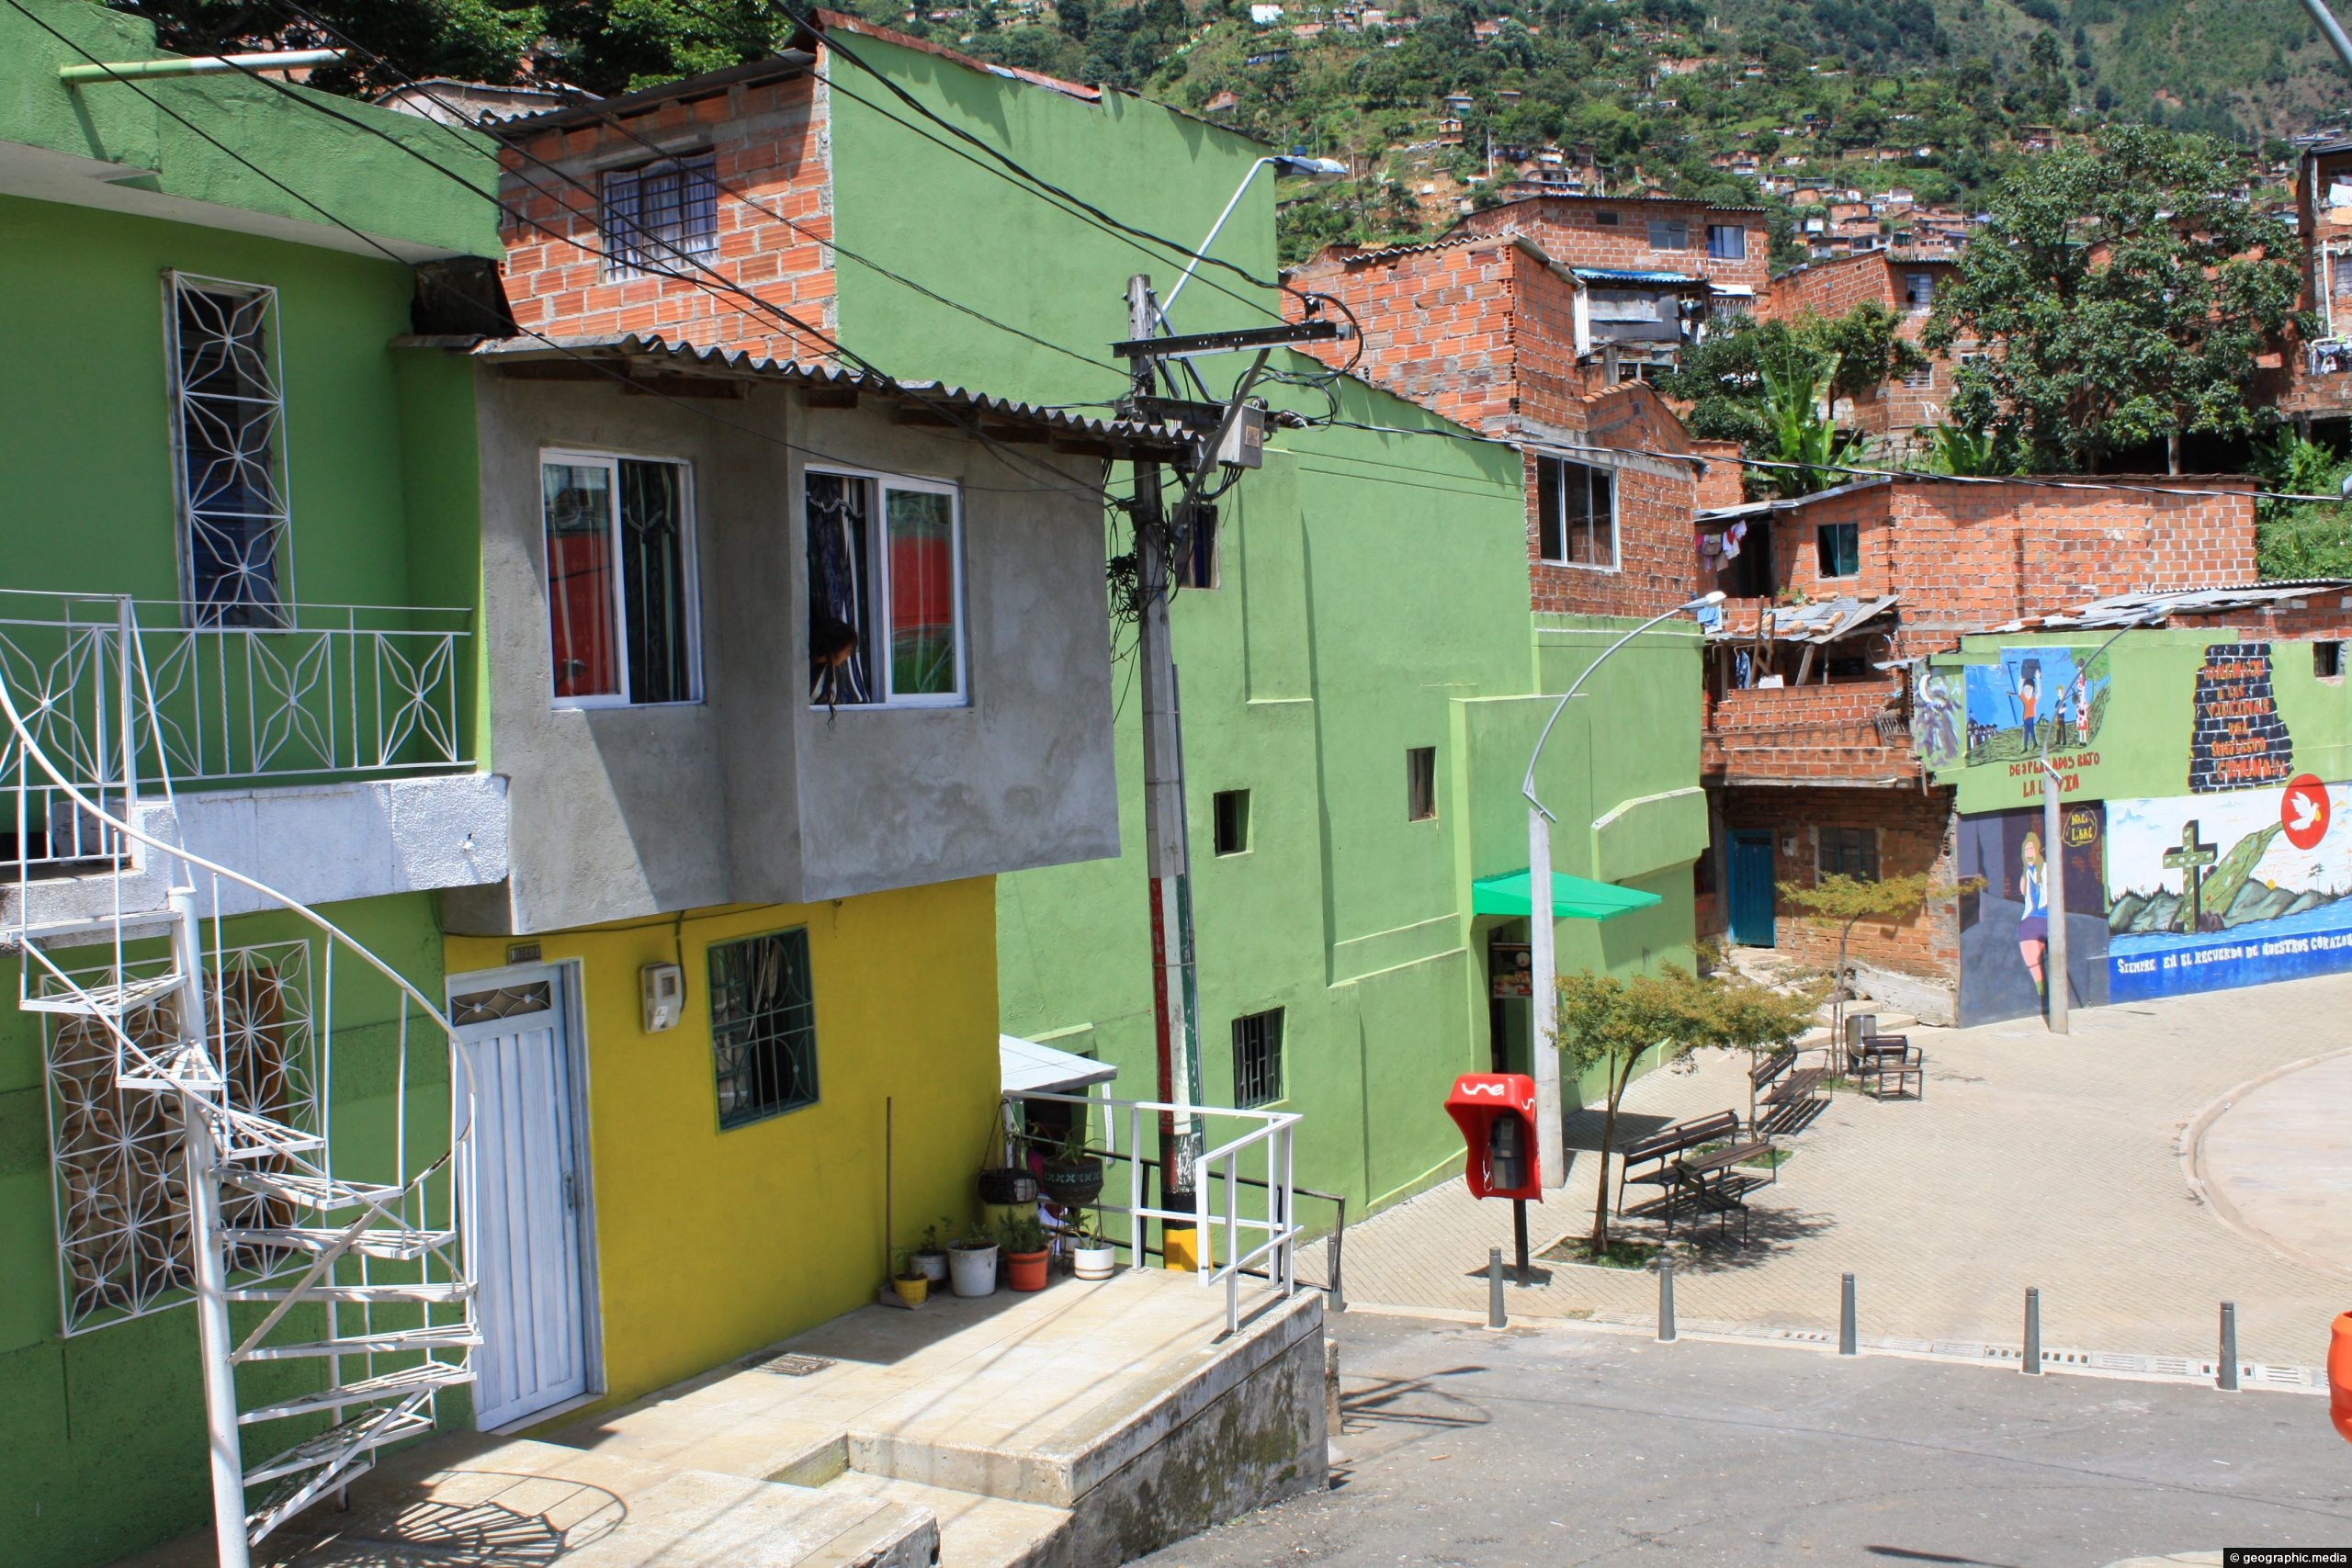 Homes in the suburb of Popular in Medellin.